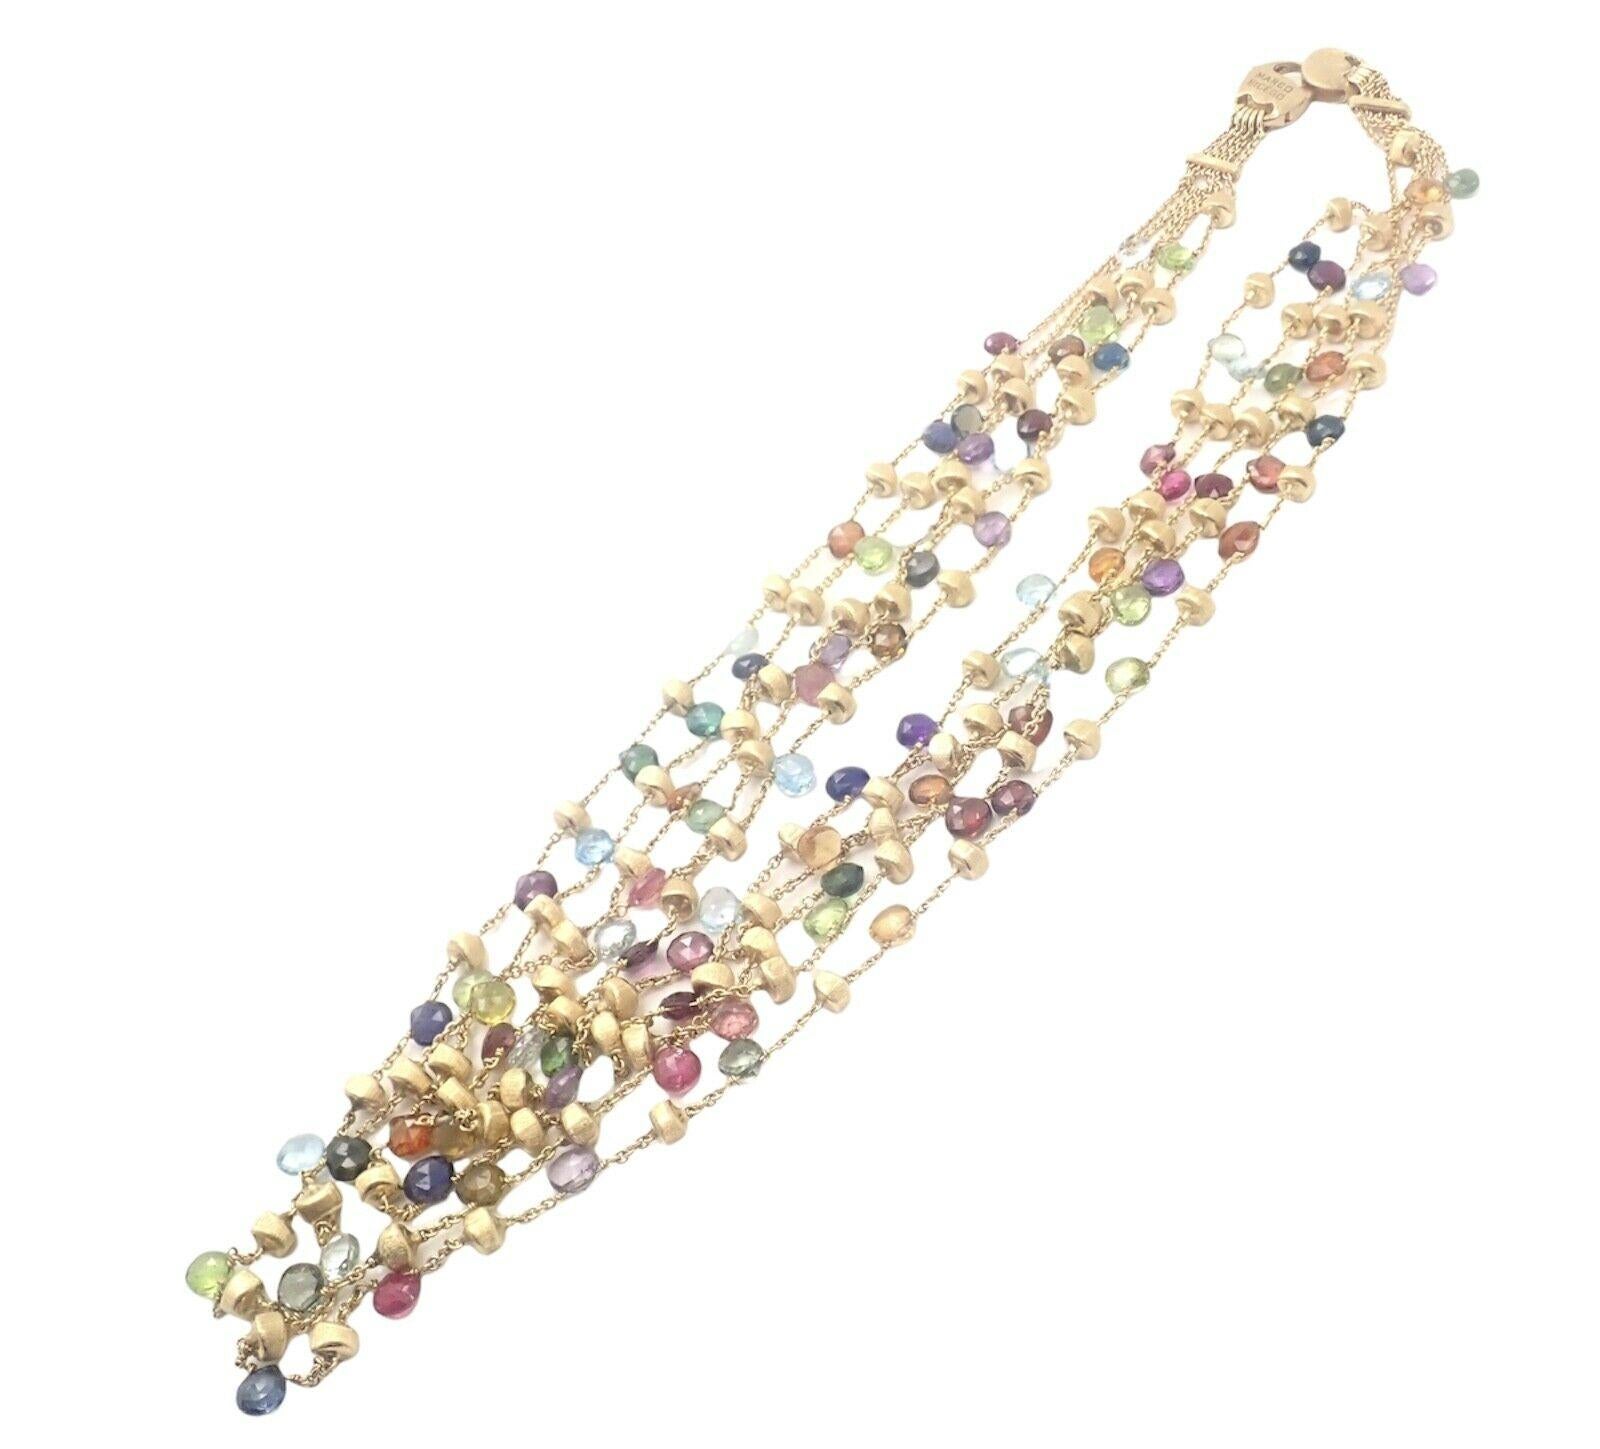 18k Yellow Gold Paradise Multicolor Gemstone 5 Strand 16 Inch Long Necklace by Marco Bicego.
With Mixed semi-precious colored stones
Necklace includes round briolette cut blue topaz, pink and green tourmaline, garnet, peridot and clear quartz